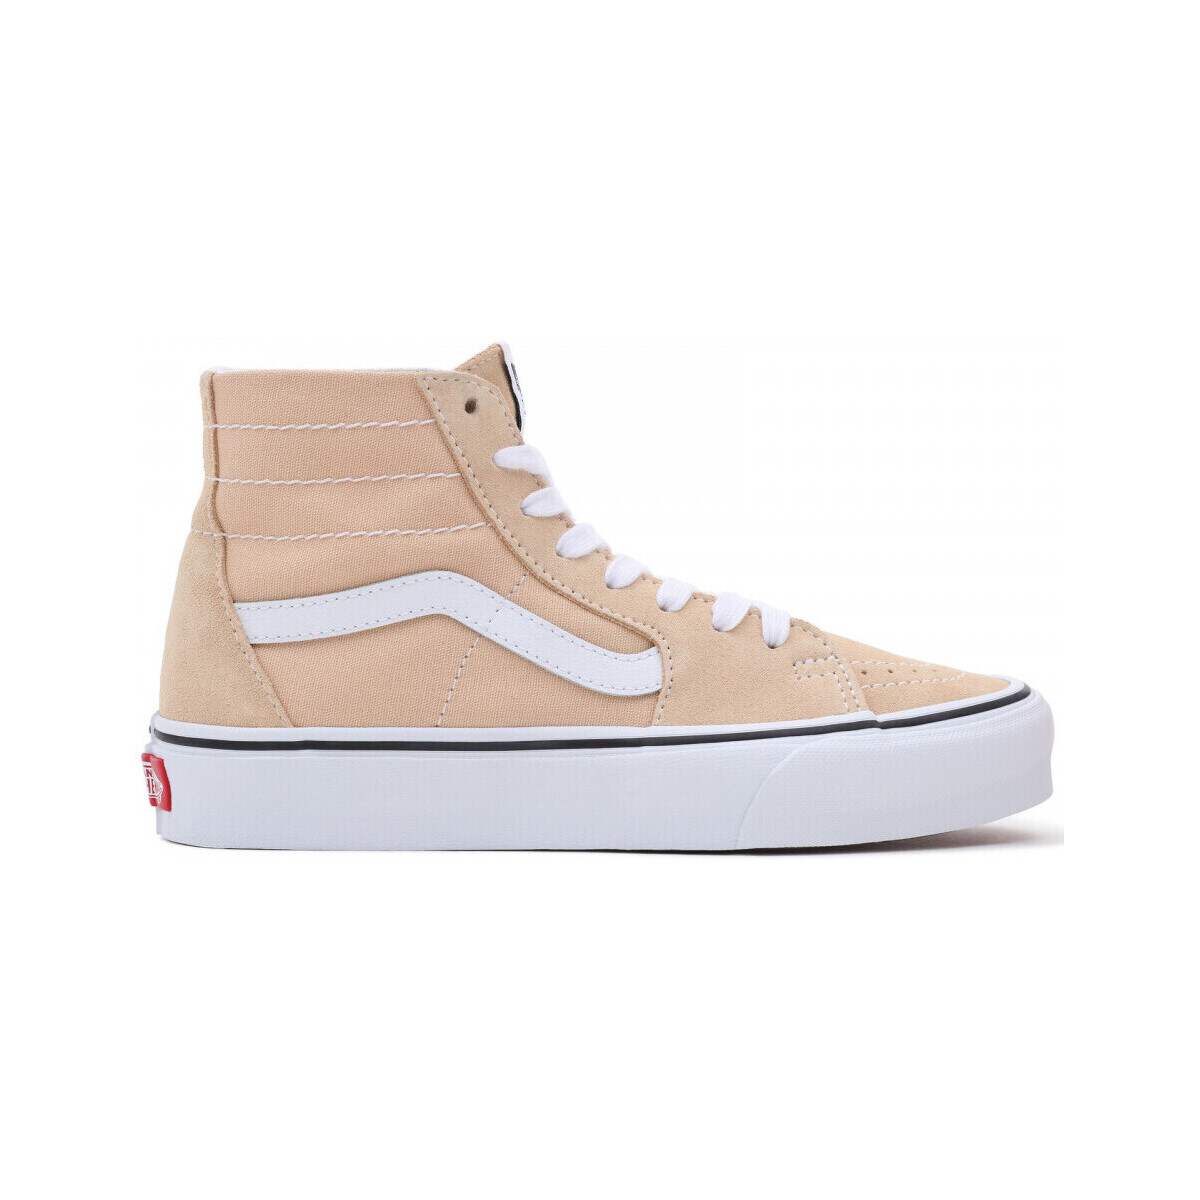 Chaussures Chaussures de Skate Vans Sk8-hi tapered color theory Jaune